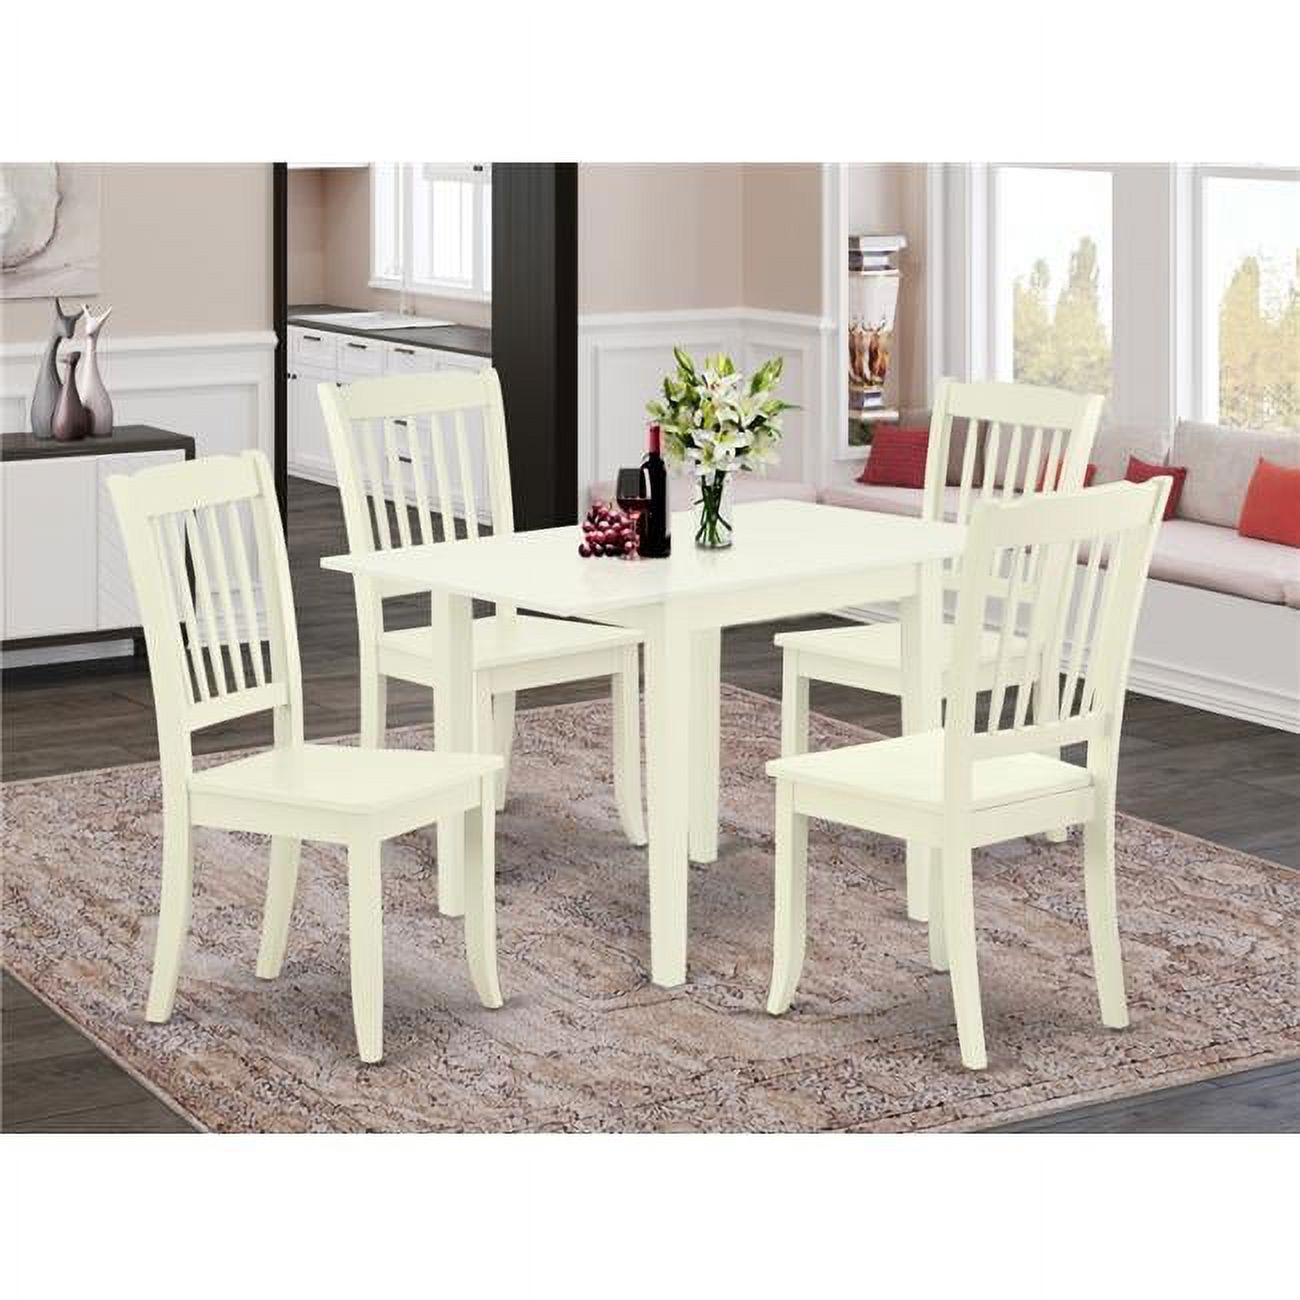 East West Furniture Norden 5-piece Wood Dining Table and Chair Set in White - image 1 of 5